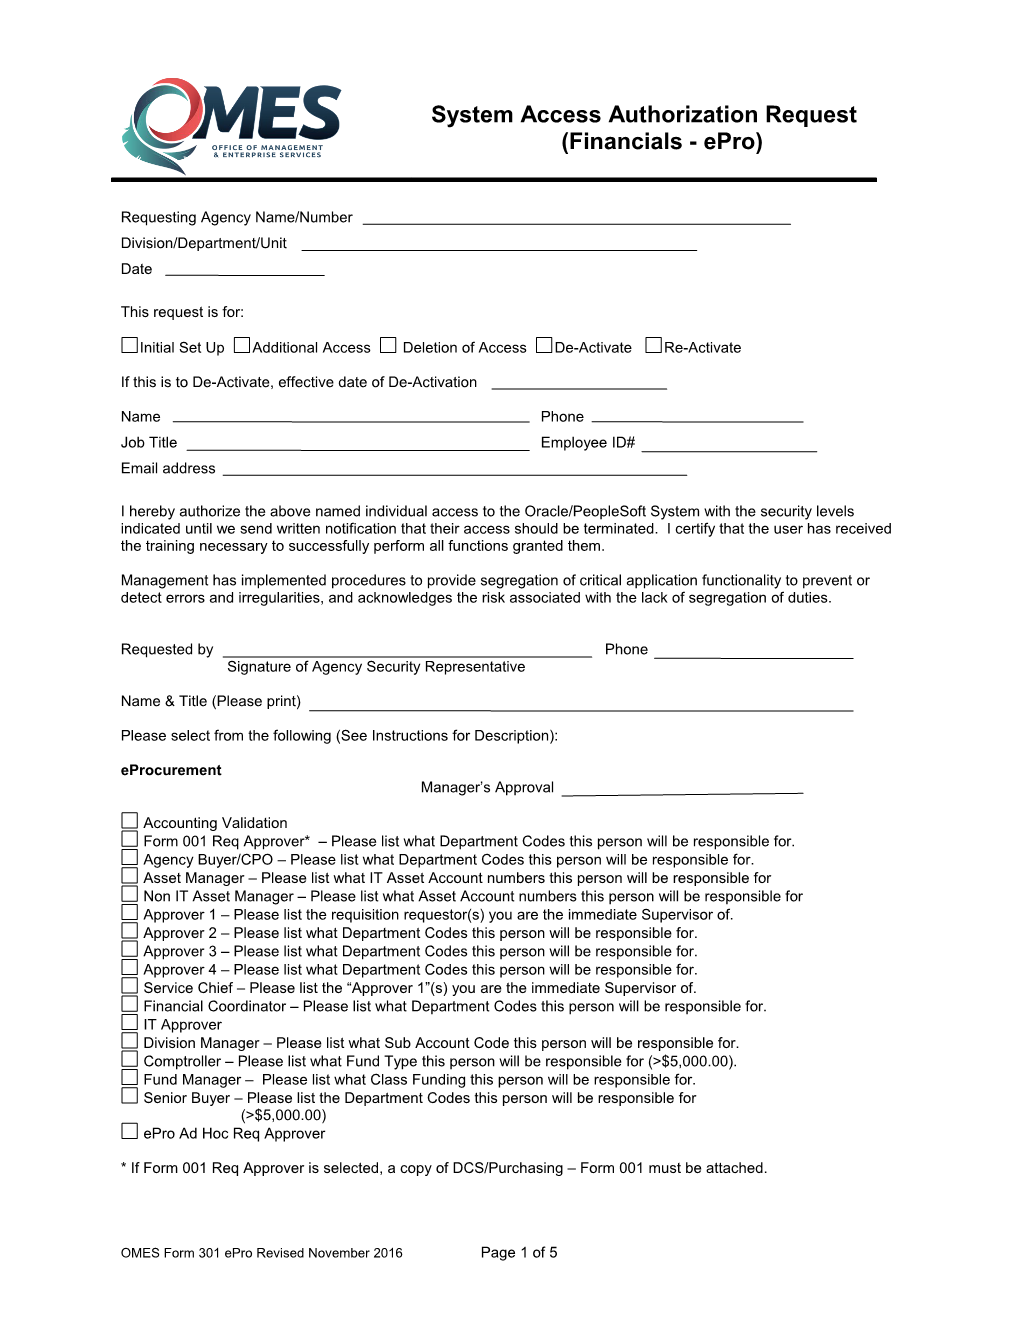 Form 301 Epro System Access Authorization Request